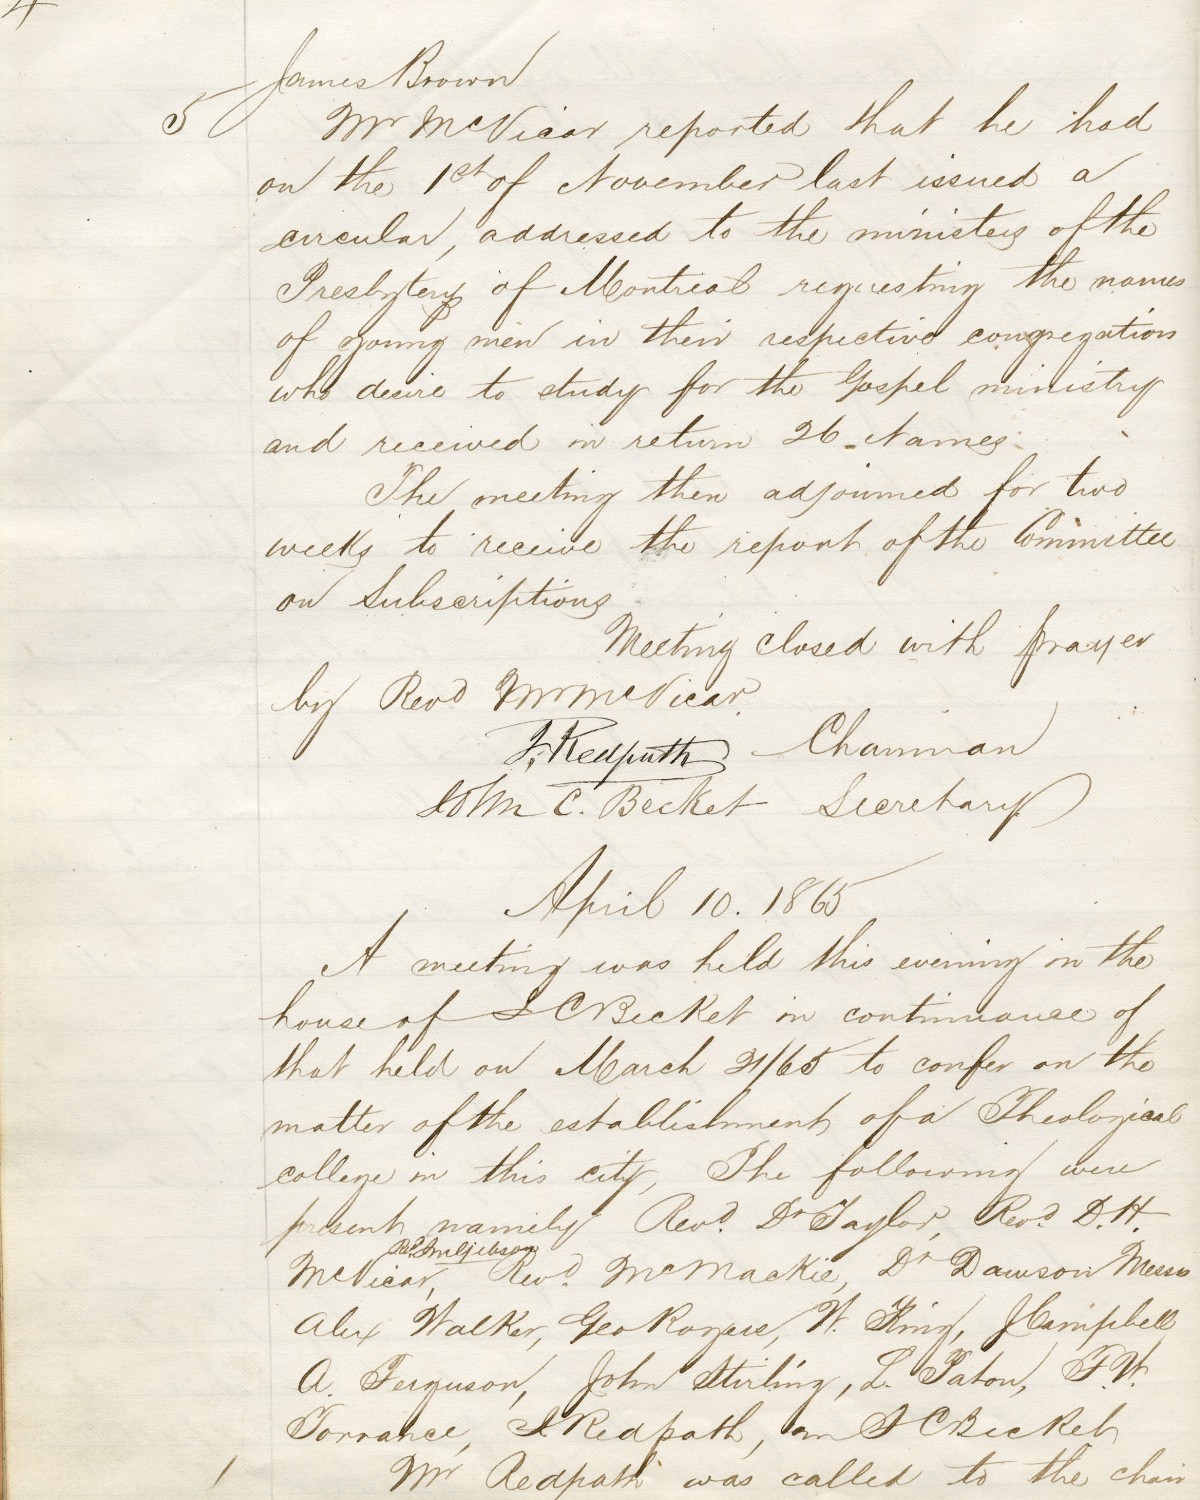 A letter regarding the Constitution of the College, 1865 discussion on the College.